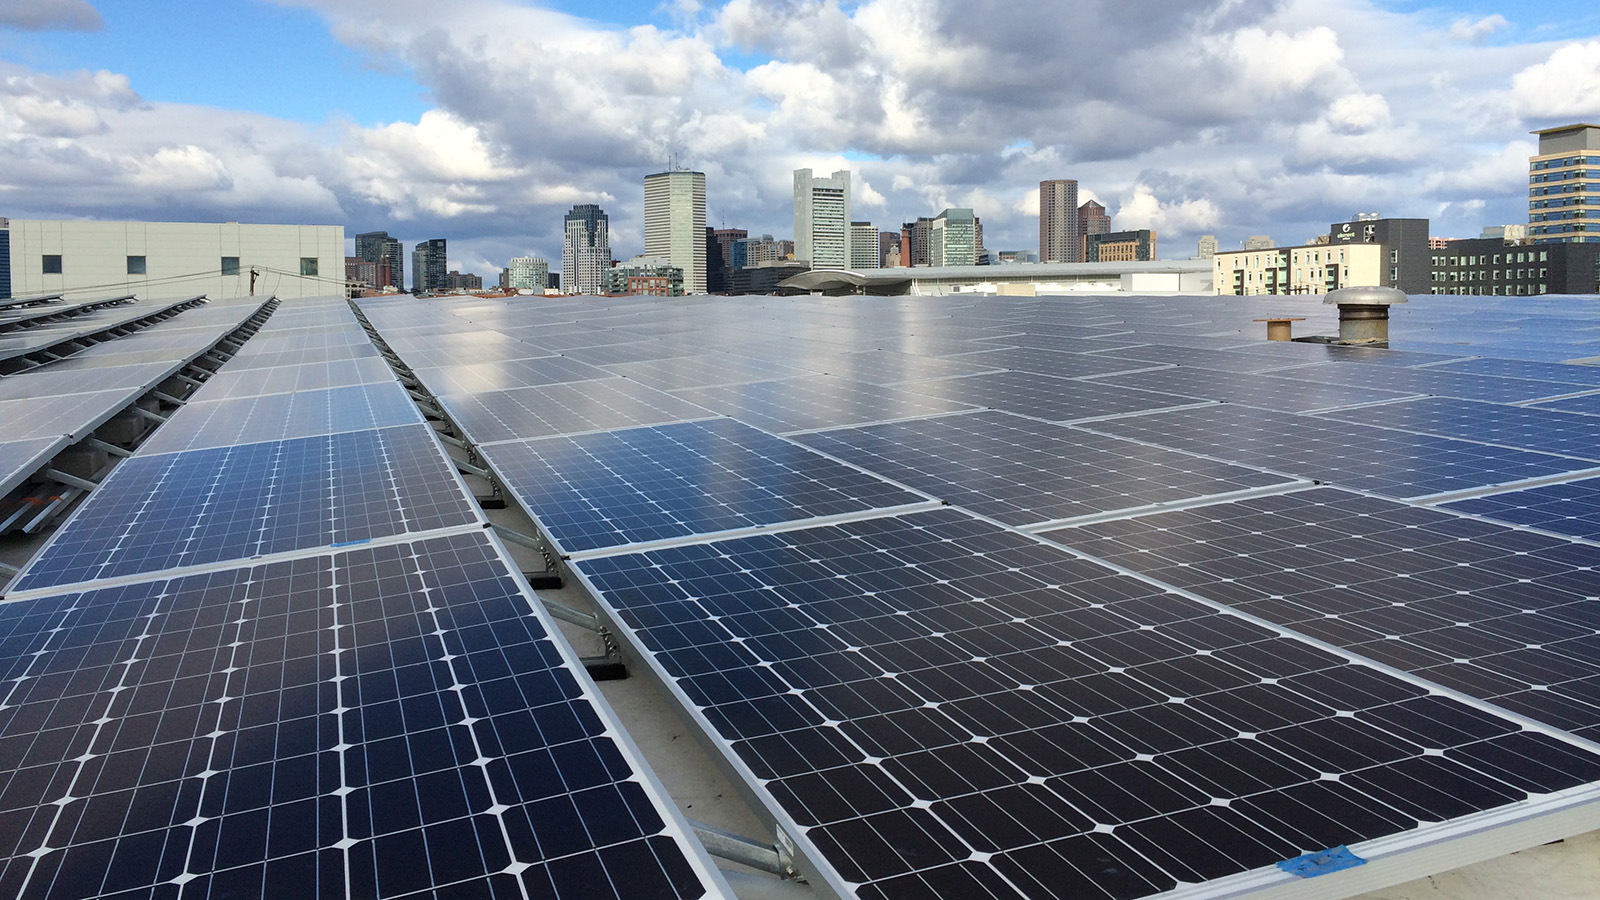 The Boston skyline is visible over the largest solar installation in Boston, located on a warehouse in the Seaport district